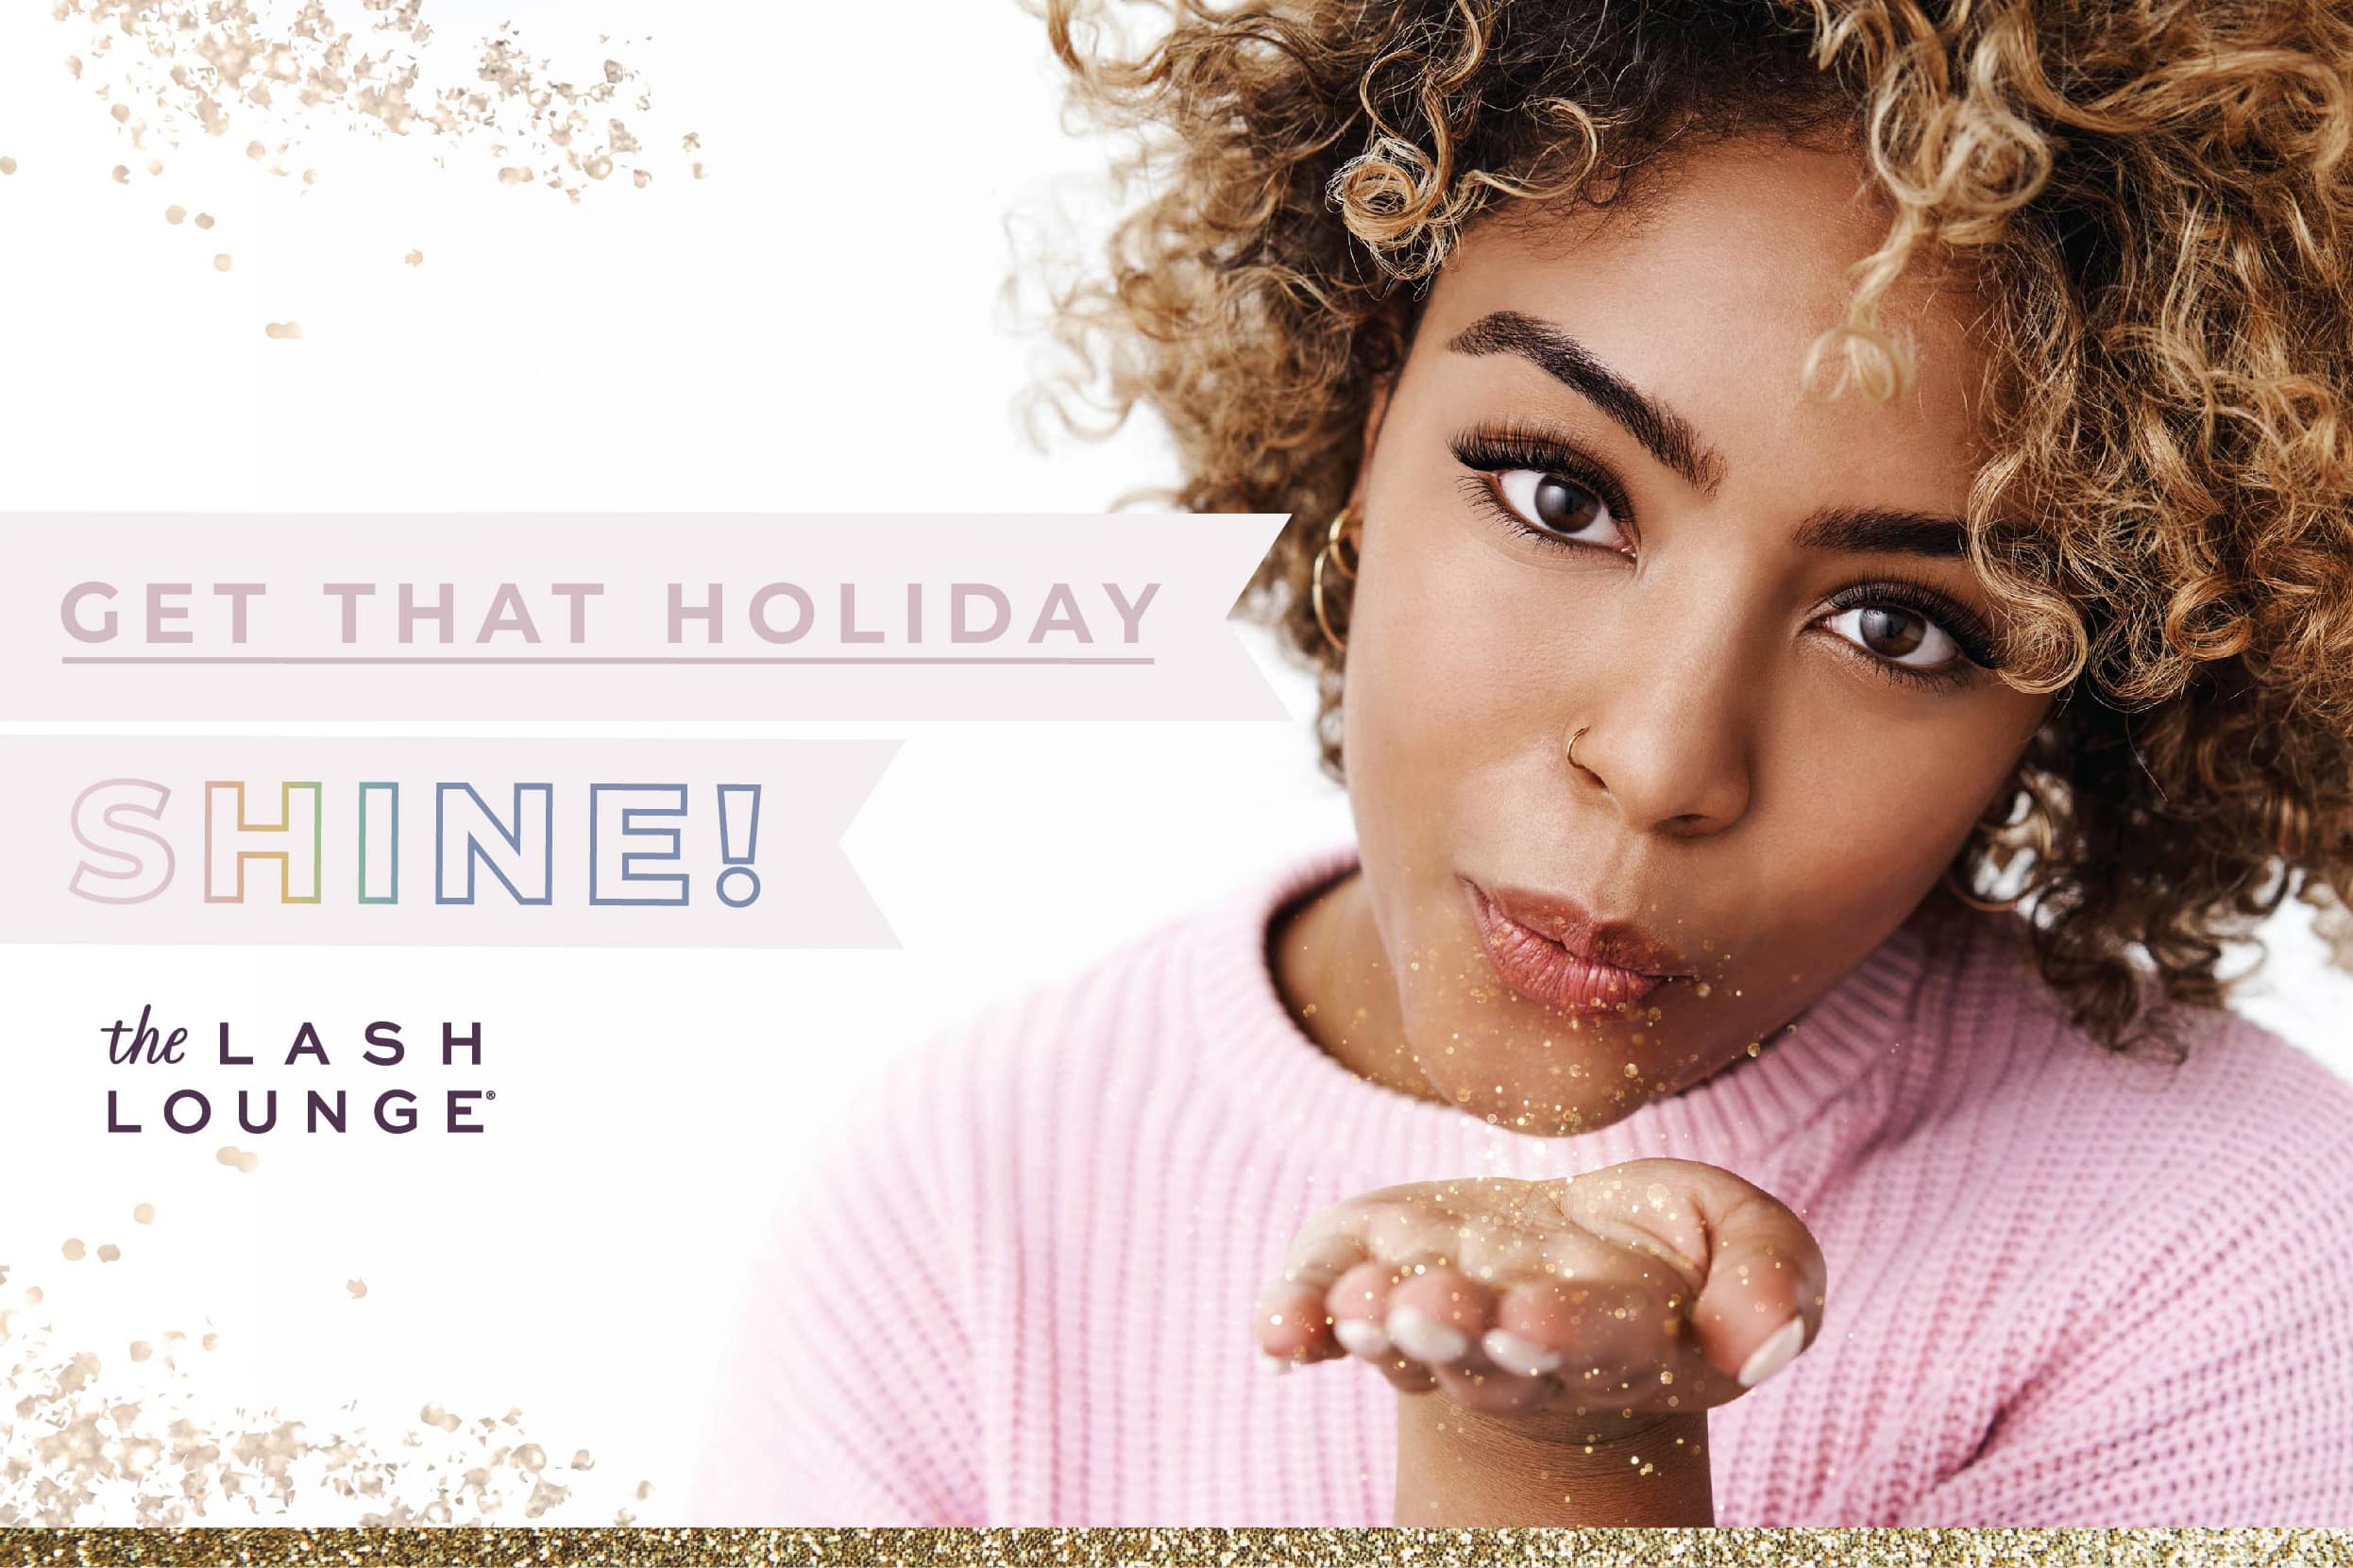 A woman in a sweater blowing glitter out of her palm with a graphic text next to her that reads "Get That Holiday Shine!"